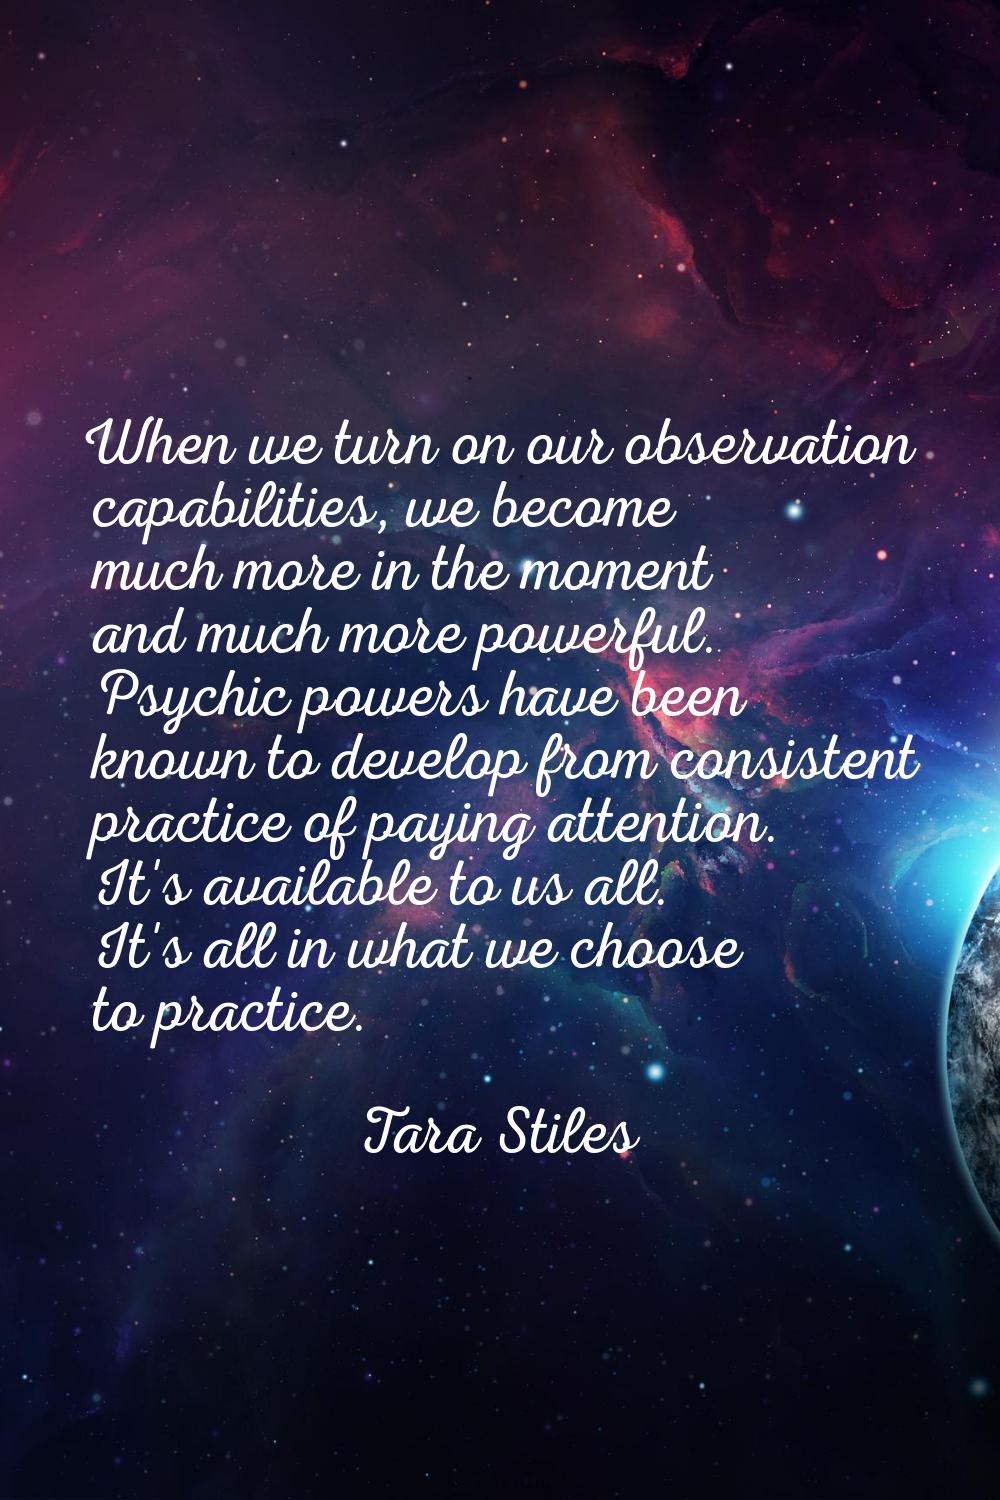 When we turn on our observation capabilities, we become much more in the moment and much more power